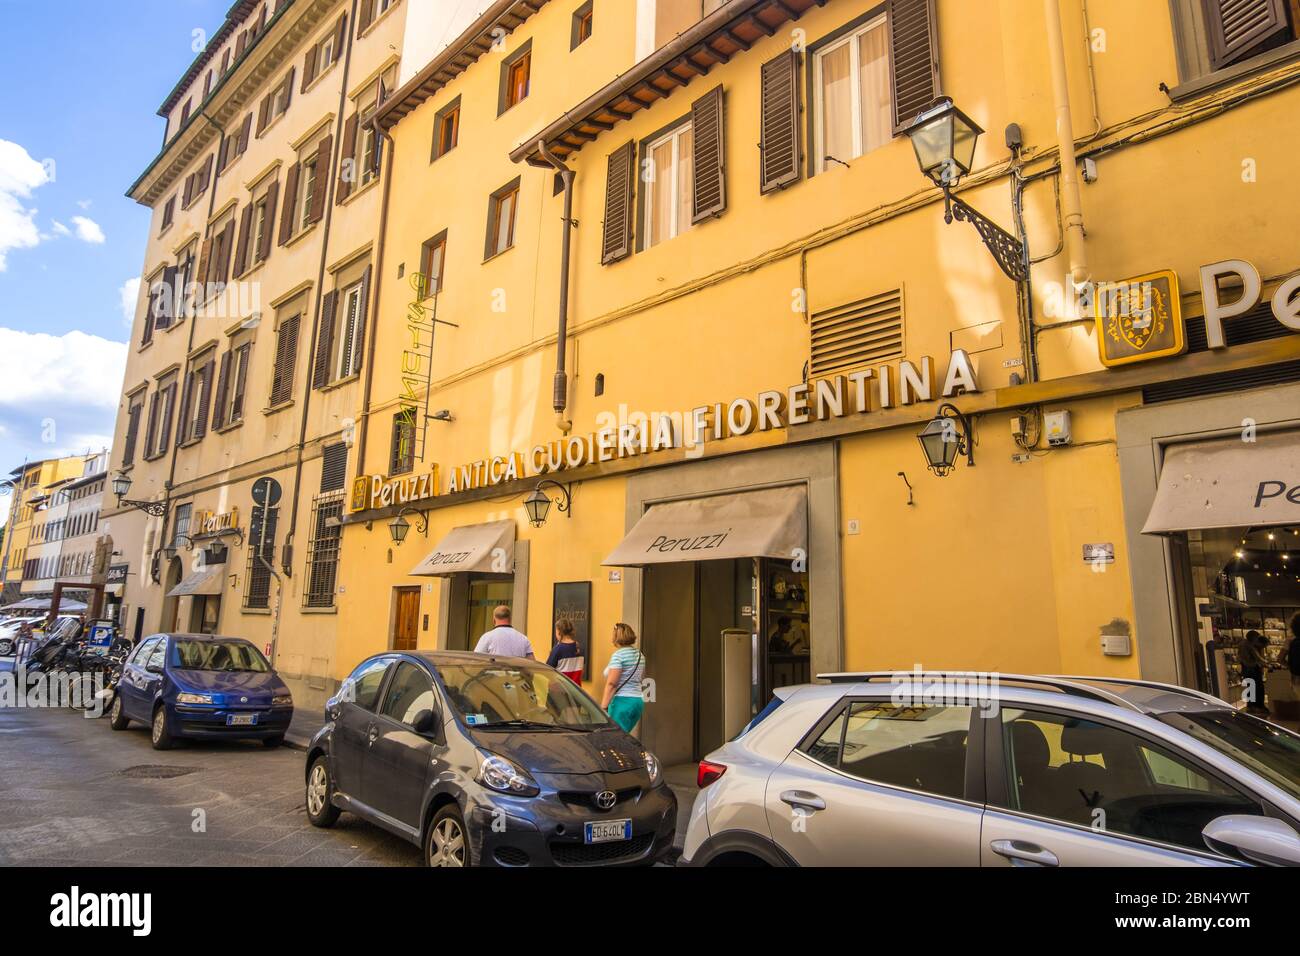 Florence, Italy - August 16, 2019: Facade of the famous clothing store Peruzzi Leather Factory in the historic centre of Florence, Tuscany, Italy Stock Photo